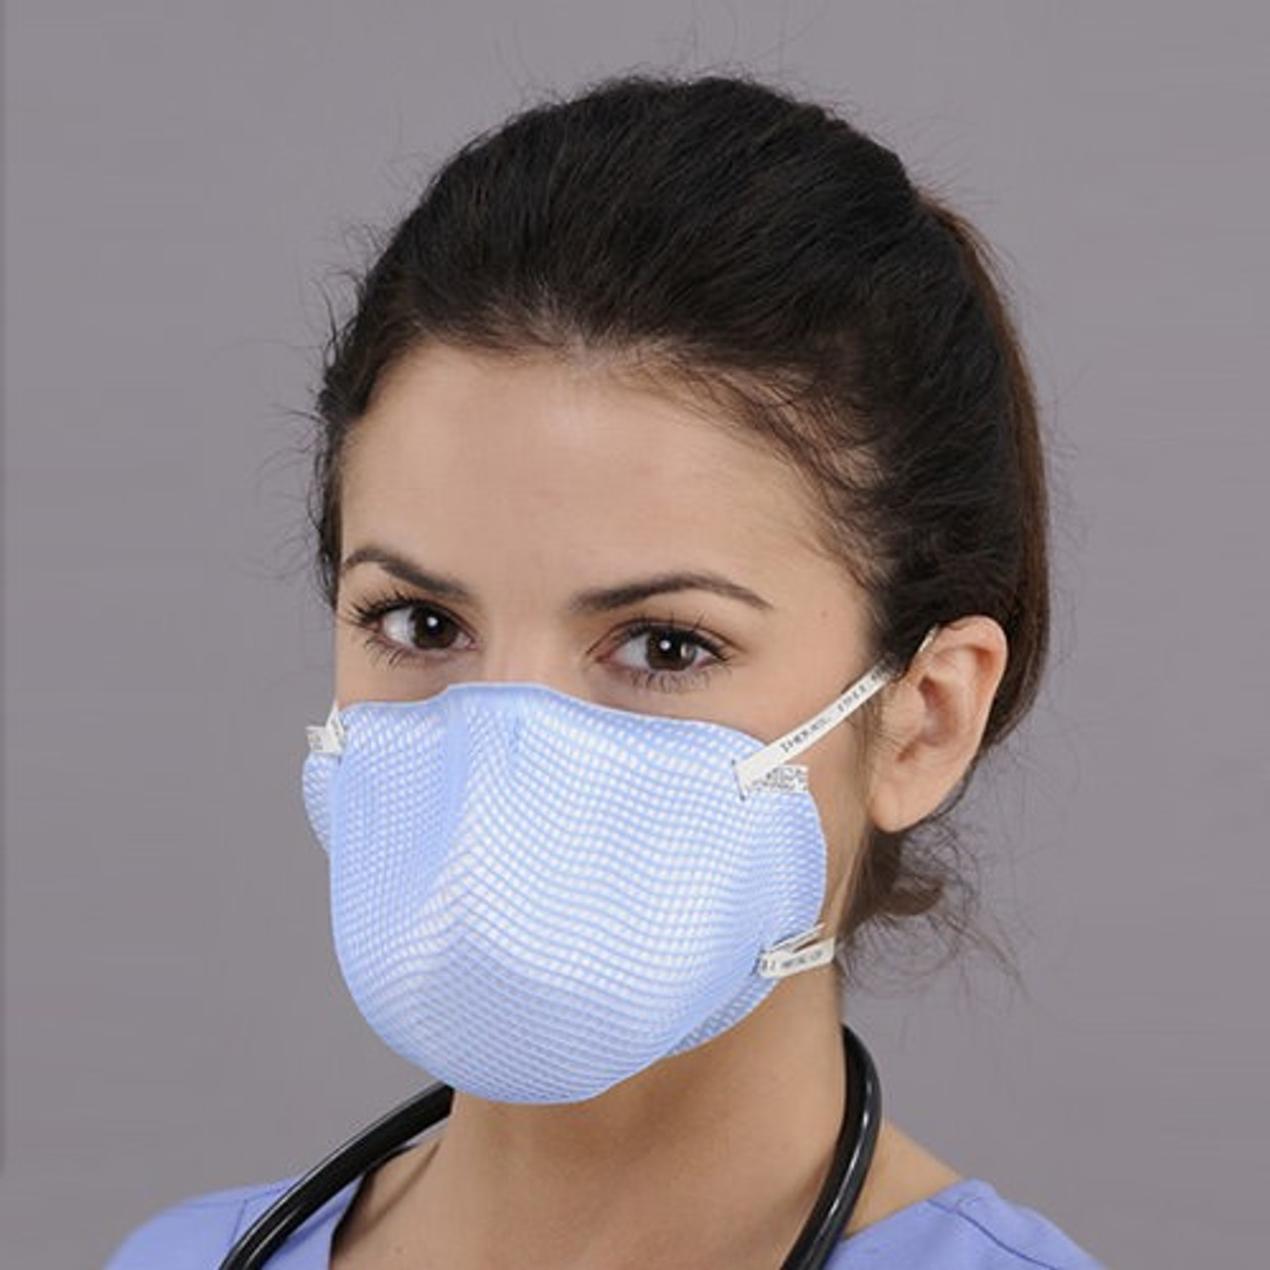 A Equipment Protective Government Health Wear